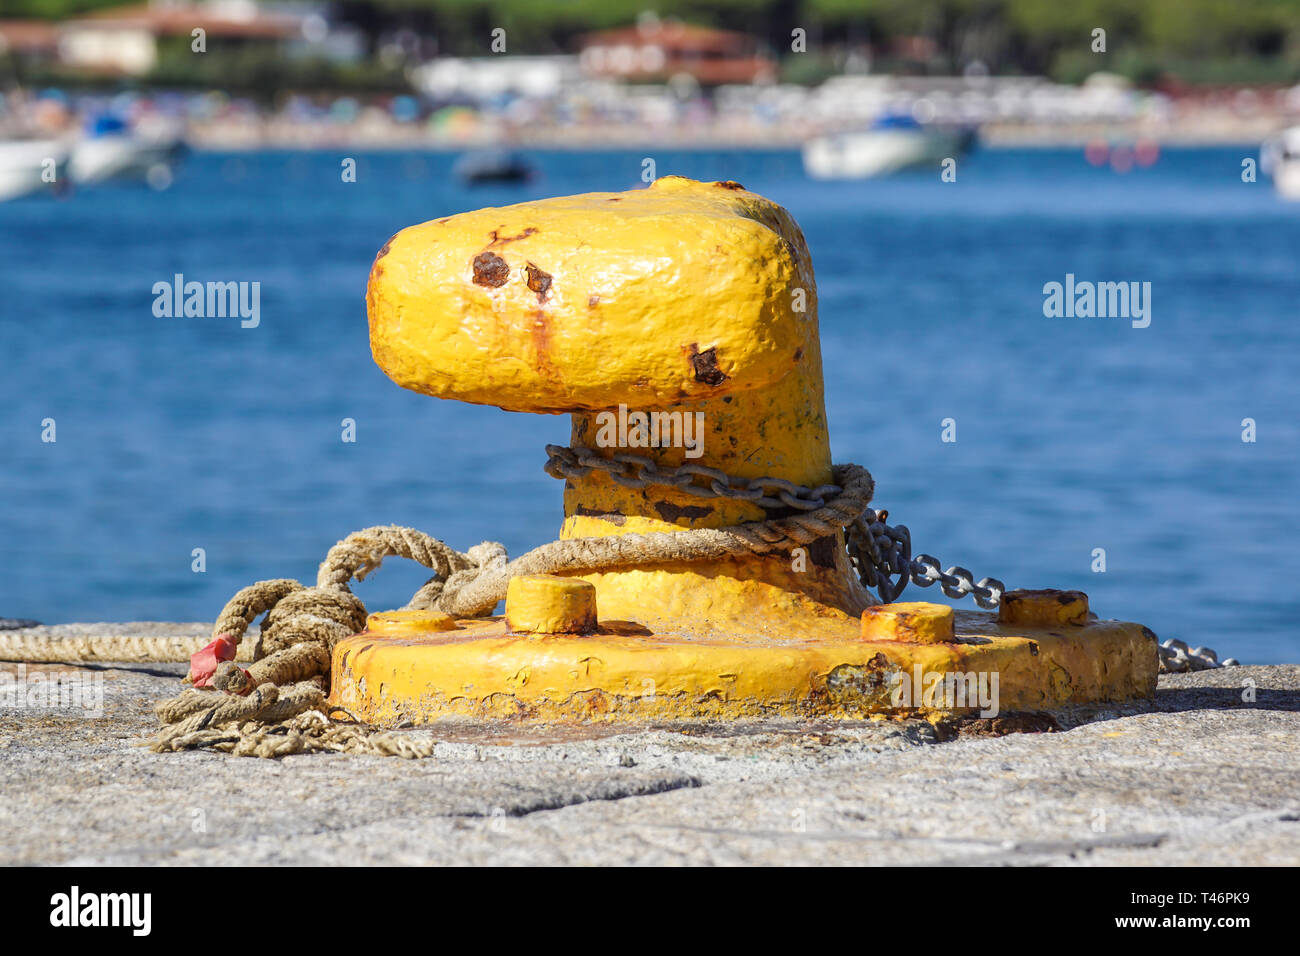 A mooring bollard entwined with a mooring rope. Moored ships at the port quay Stock Photo